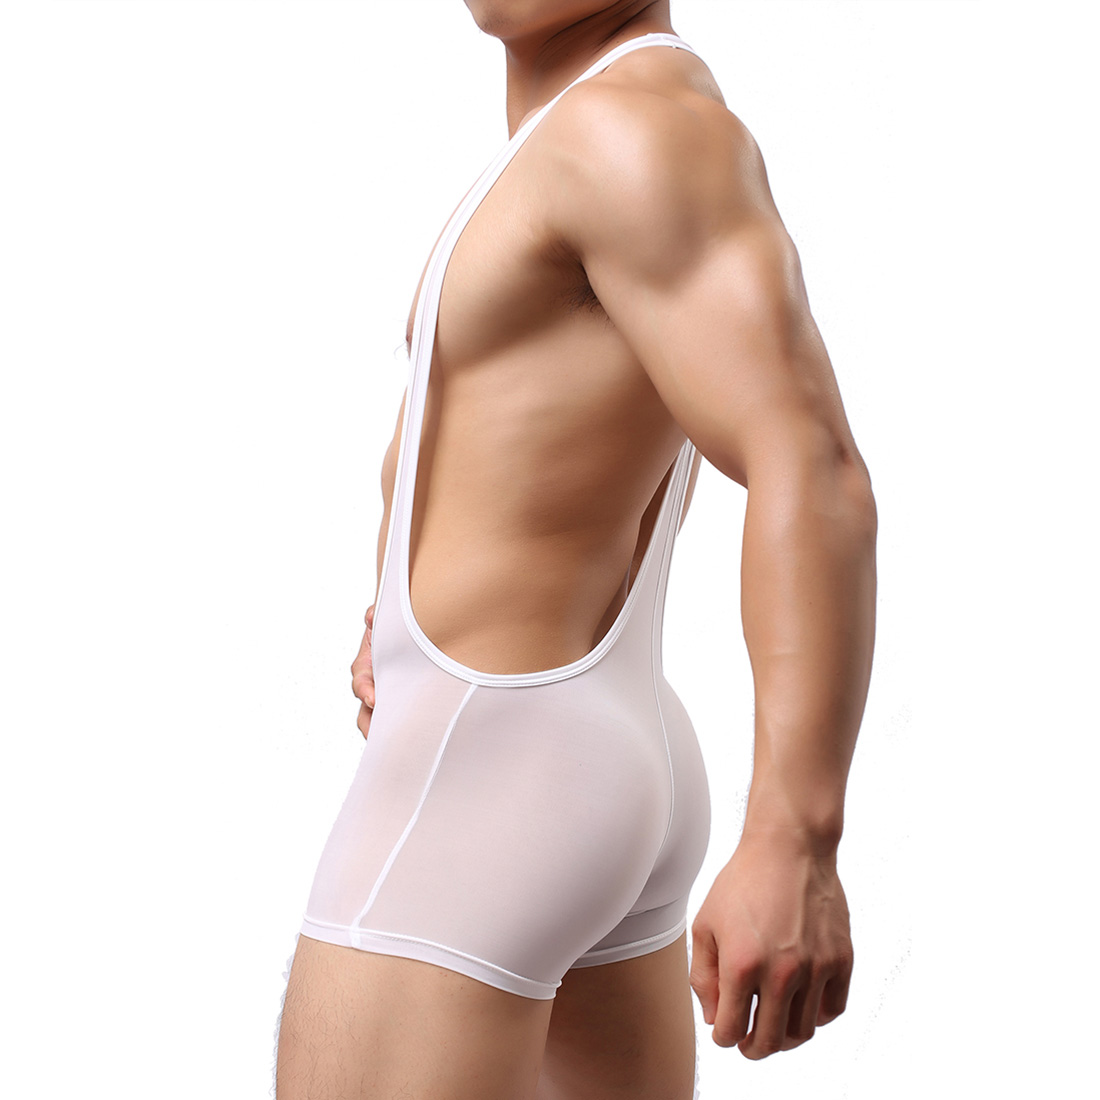 Men's Sexy Lingerie Underwear Sport Fitness One-pieces Swimsuit Wrestling Dress WH41 White L